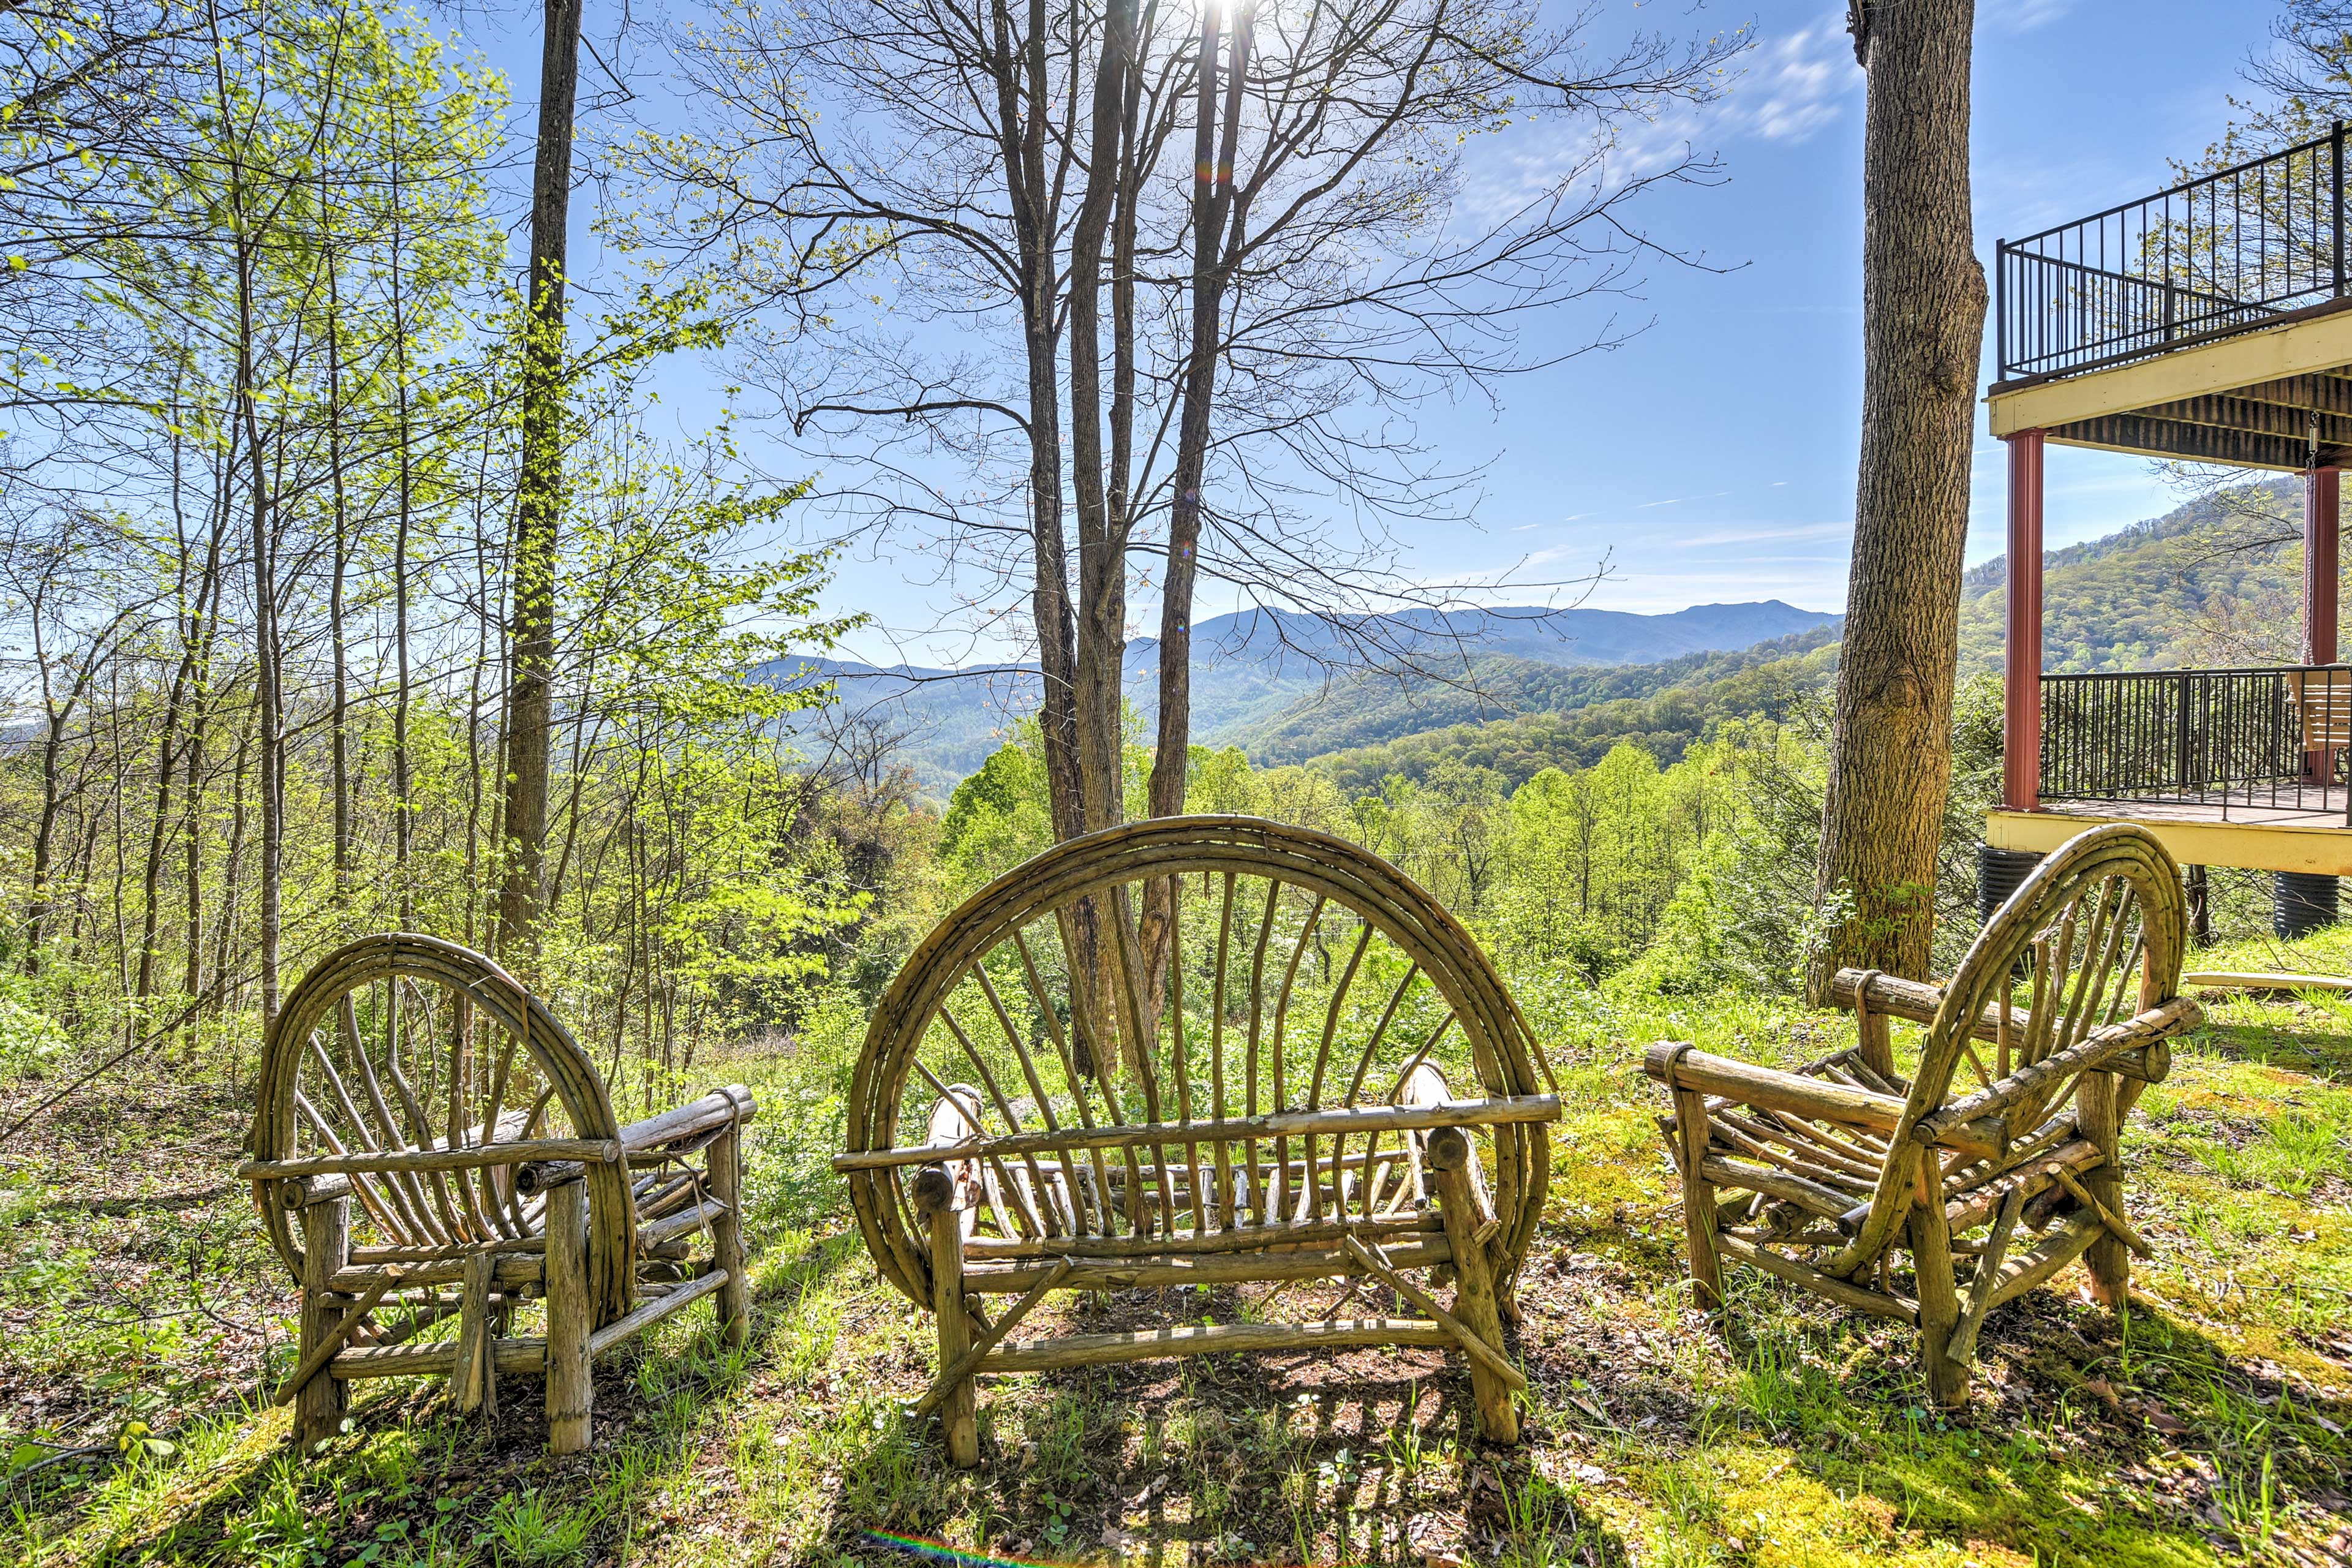 Enjoy endless mountain views from just about anywhere on the property!